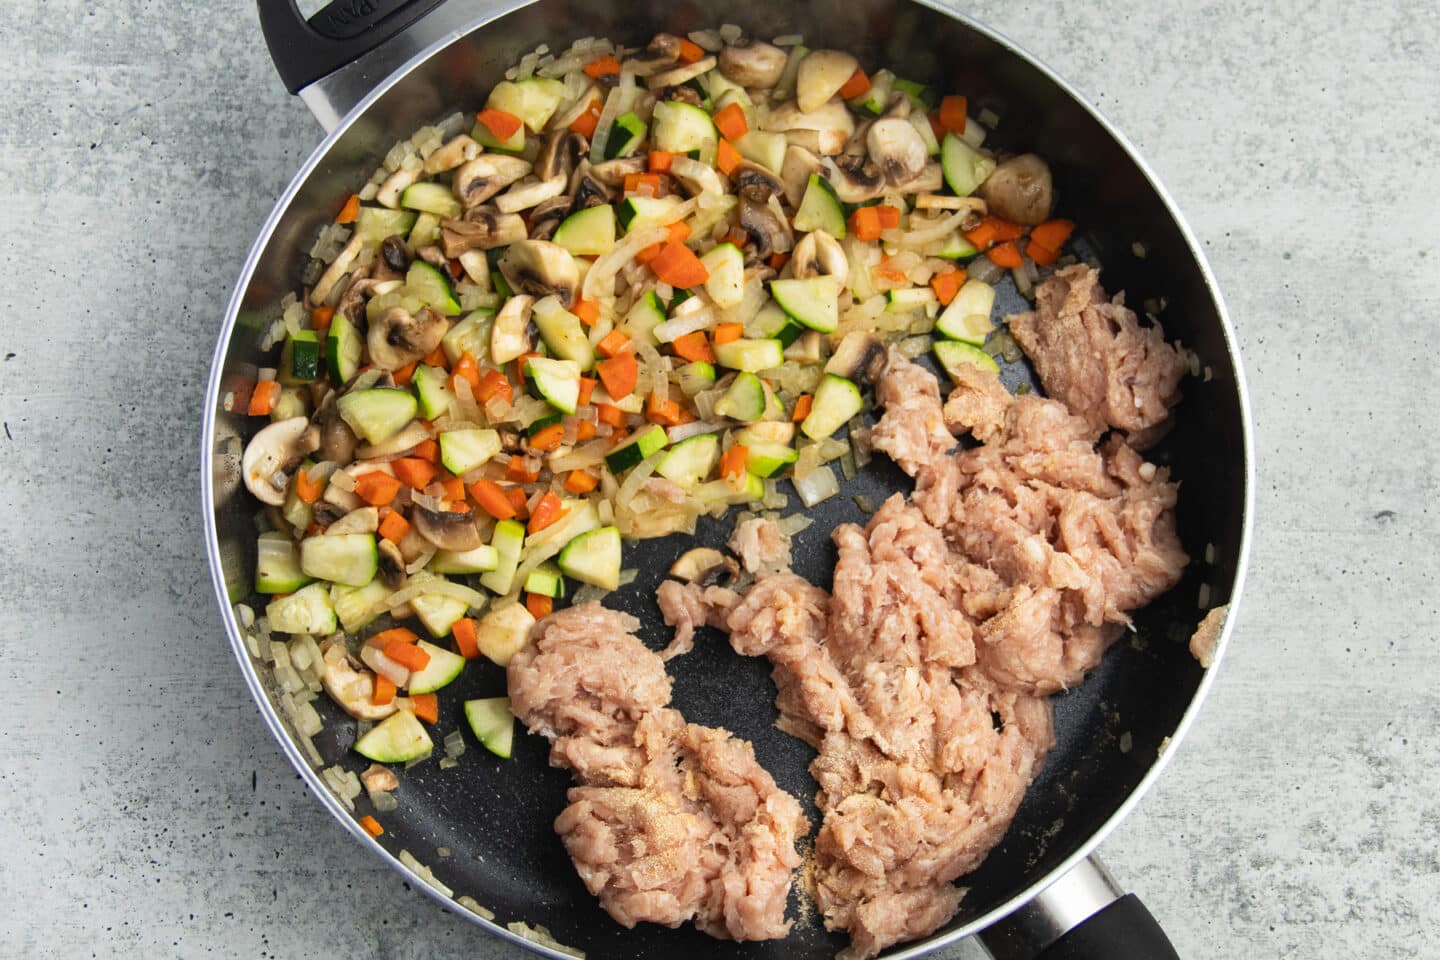 This is a picture of a skillet with the veggies and ground chicken added.